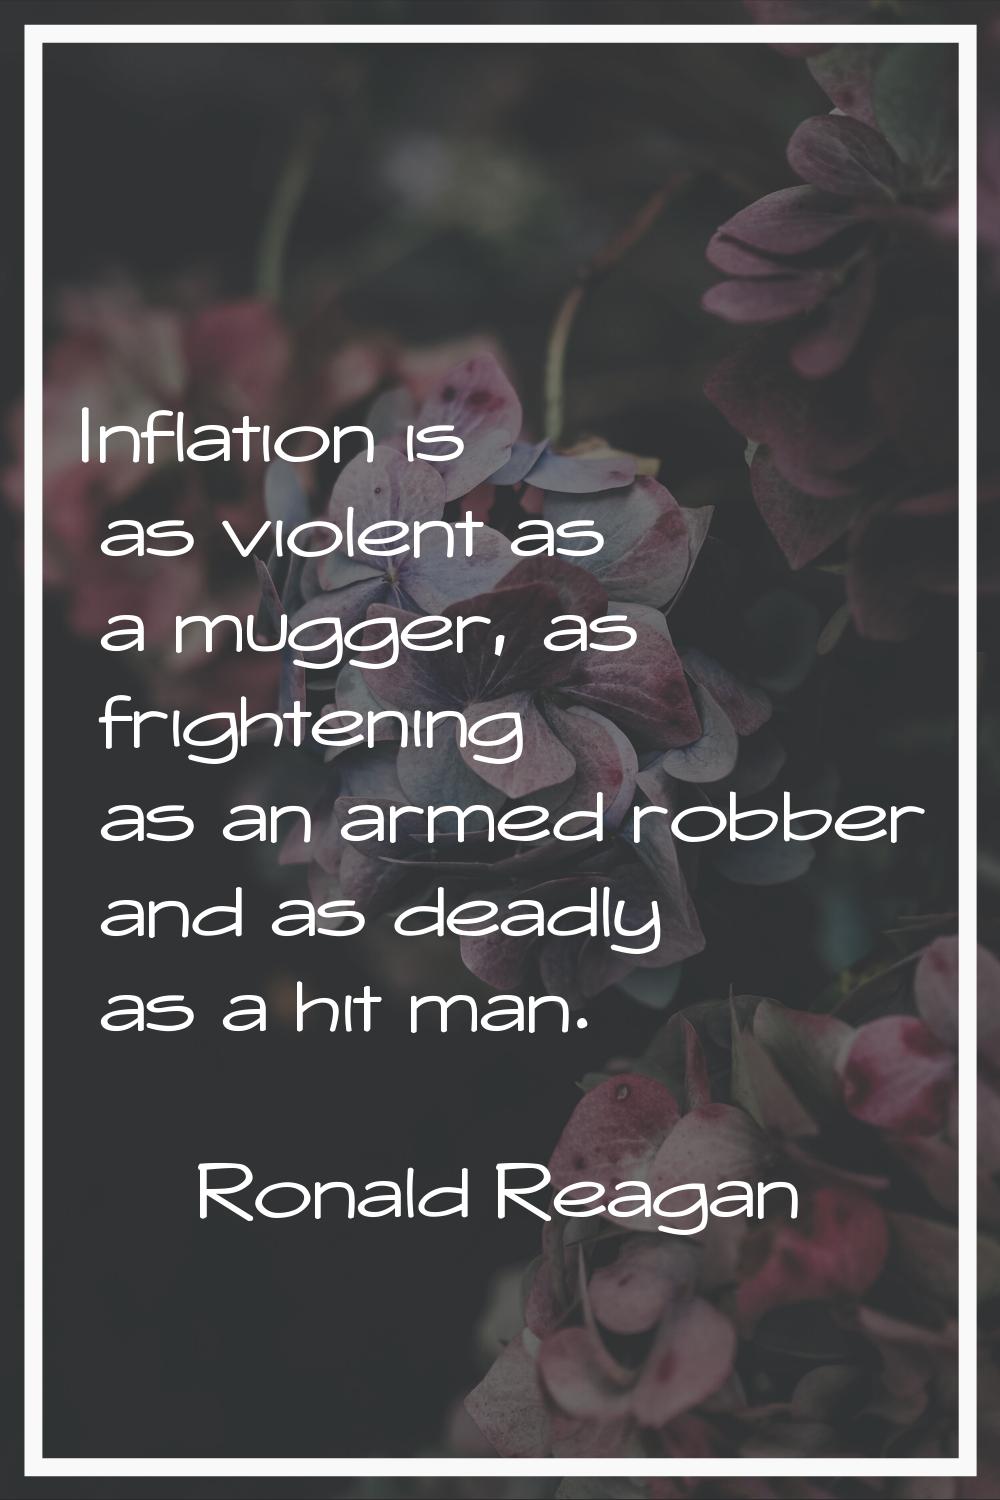 Inflation is as violent as a mugger, as frightening as an armed robber and as deadly as a hit man.